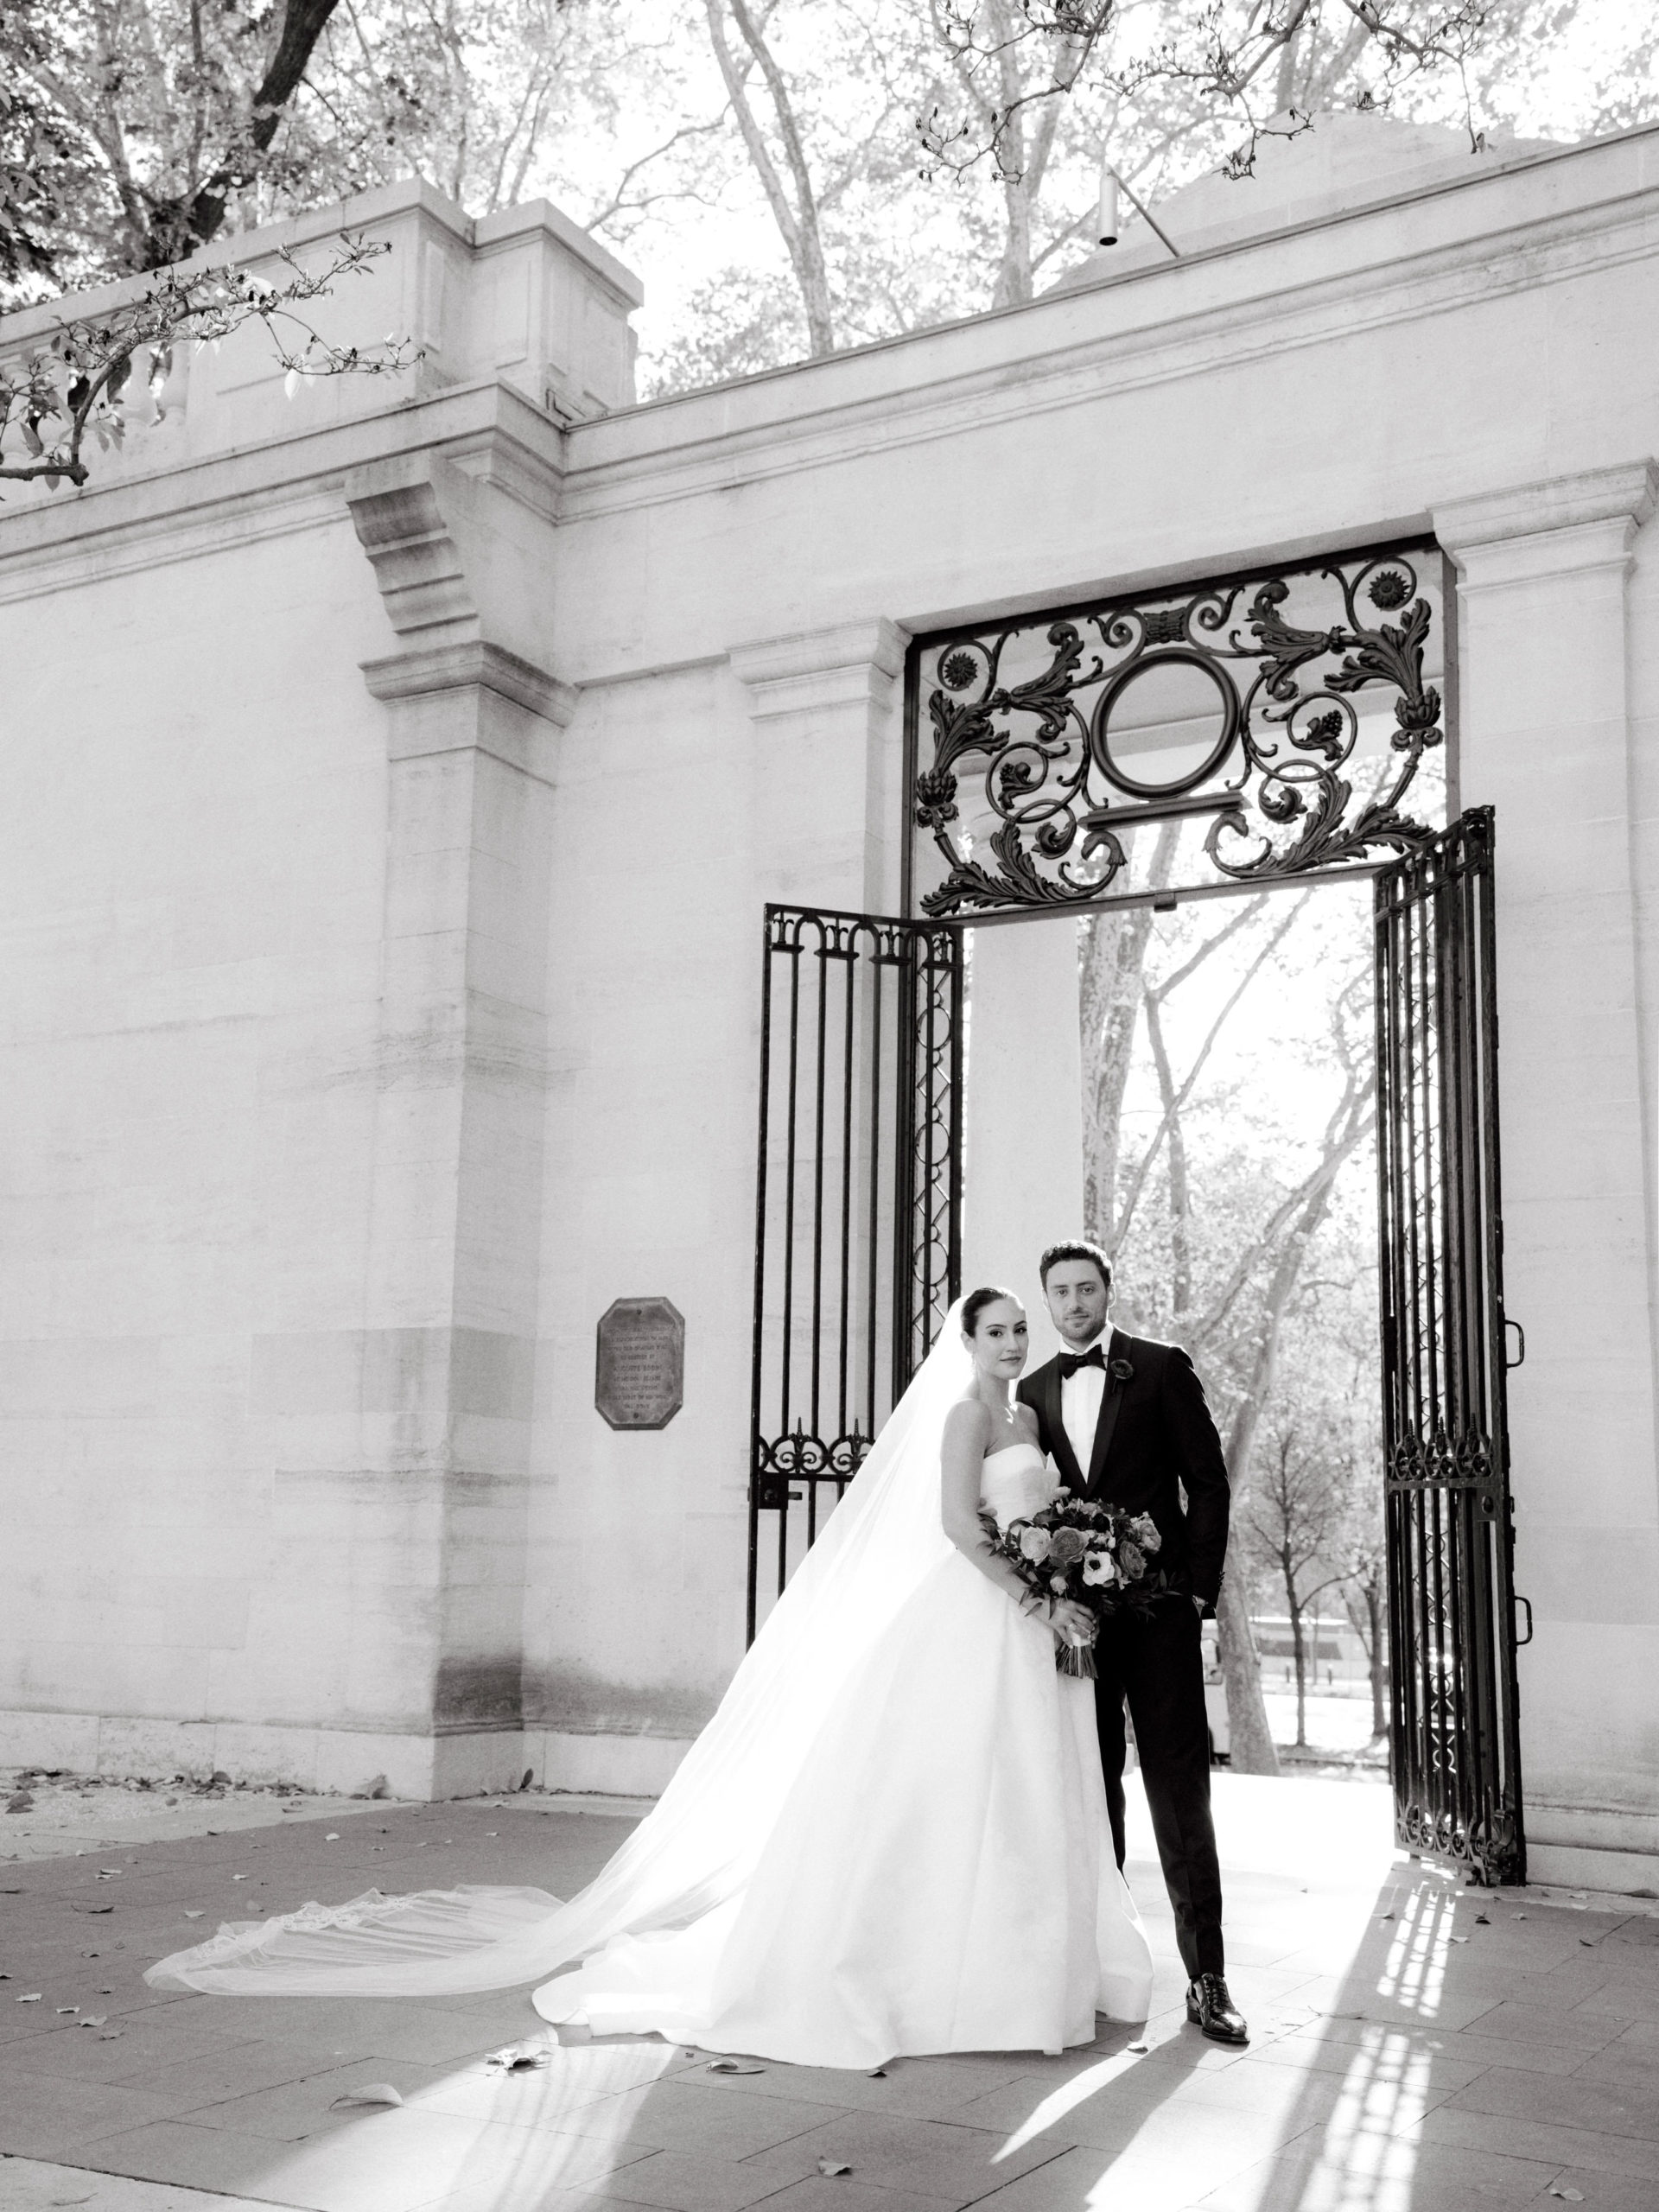 Editorial image of the bride and groom in front of the wedding venue. Luxury wedding venues image by Jenny Fu Studio